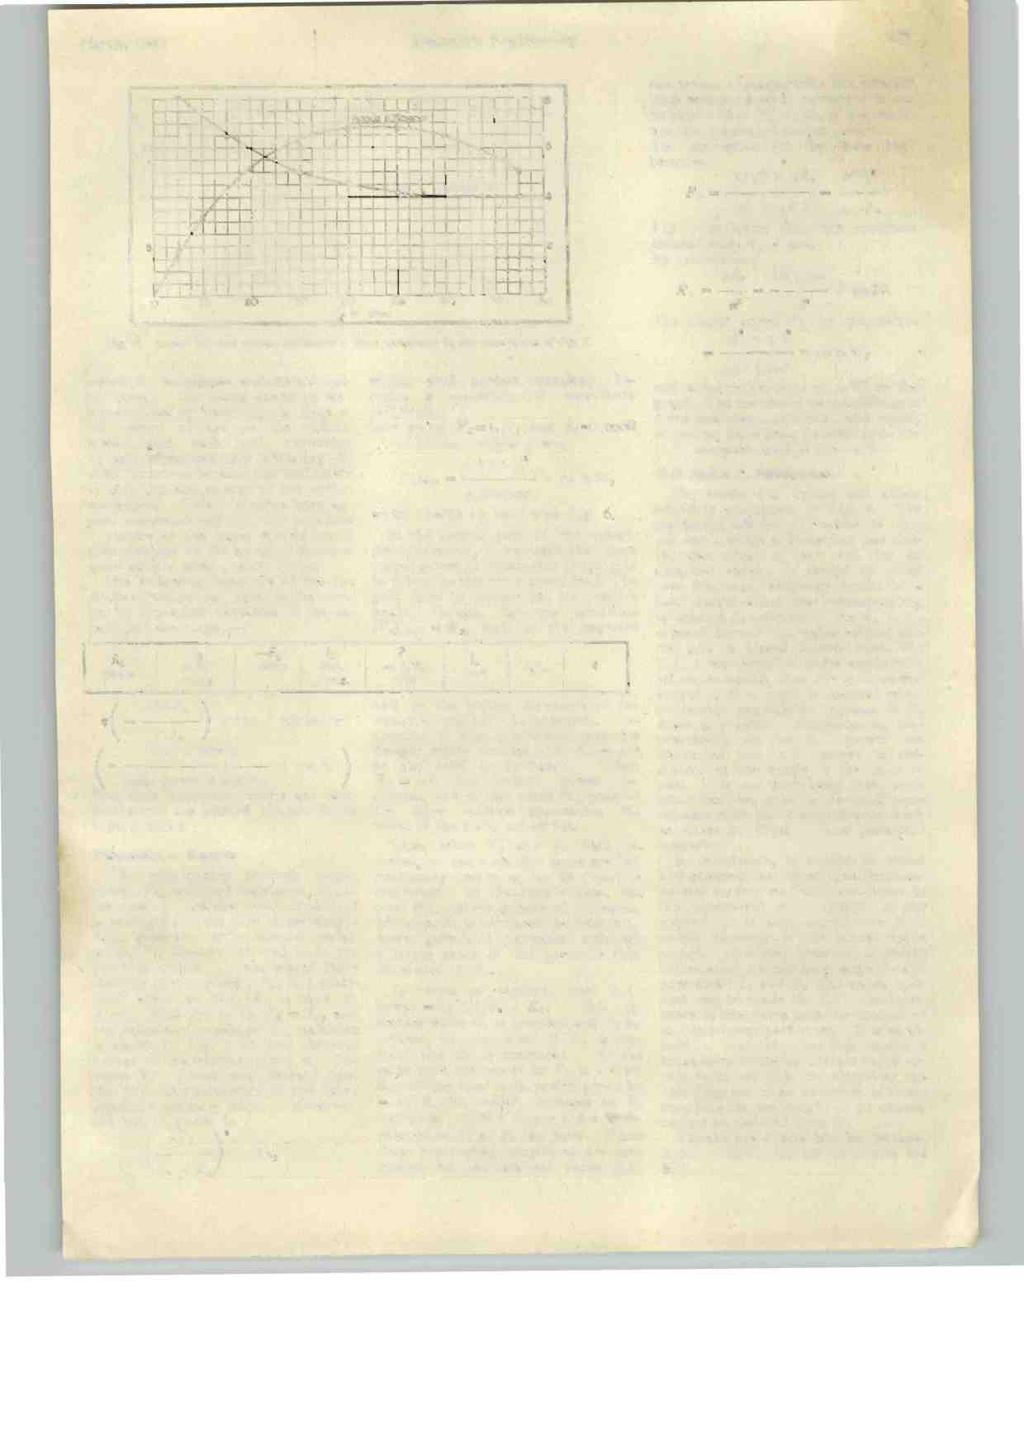 March, 1943 Electronic Engineering 429 Anole E19ciency 0 10 20 30 40 50 R2 in ohms i. Anode D.C. 8 6 4 60 70.80 Fig. 8. Anode d.c. and Anode efficiency v. load resistance Rs for conditions of F g. 7. justed for maximum undistorted output power.